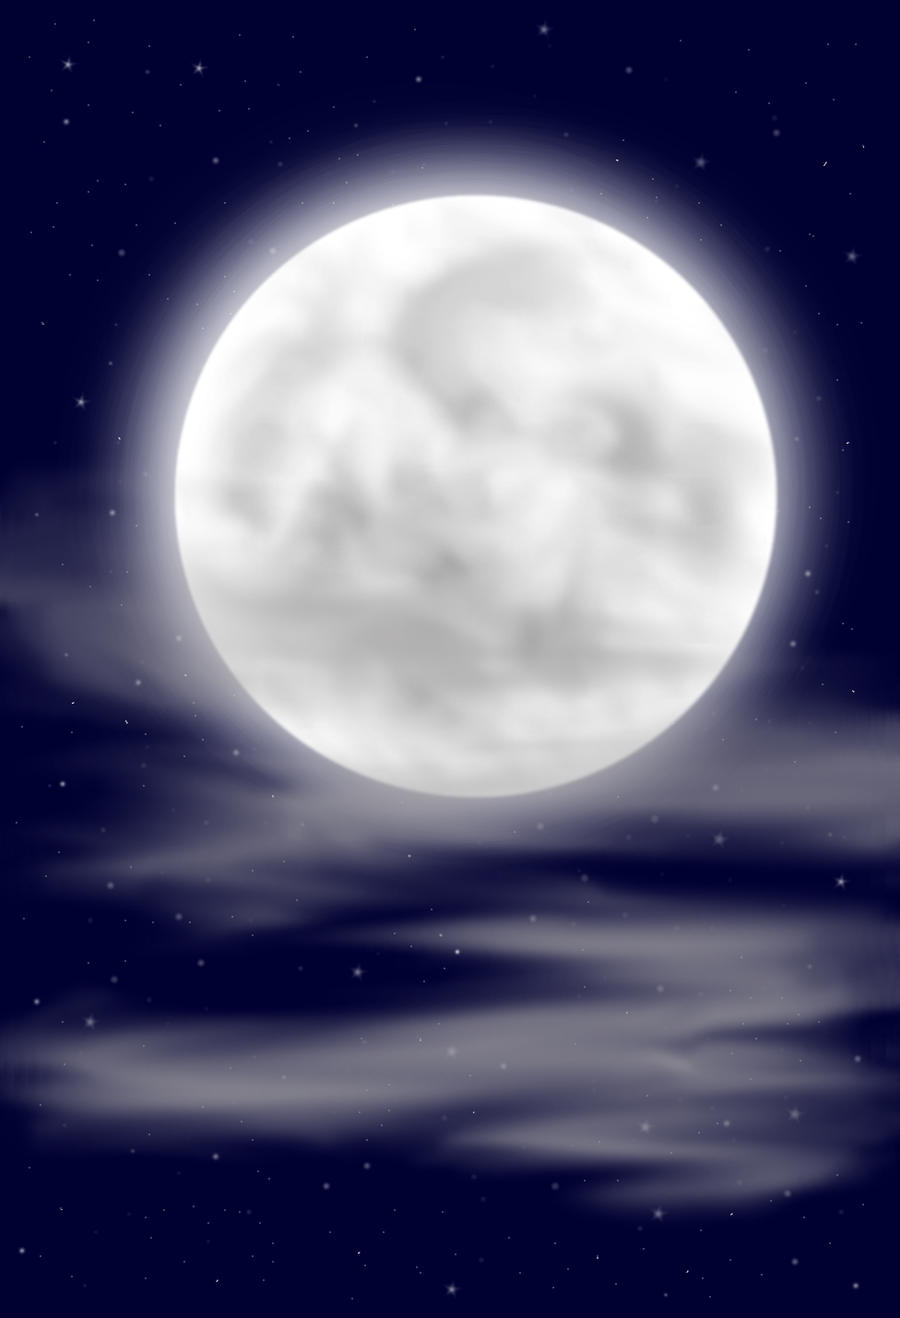 Moon Background By Kate 7htc On DeviantArt